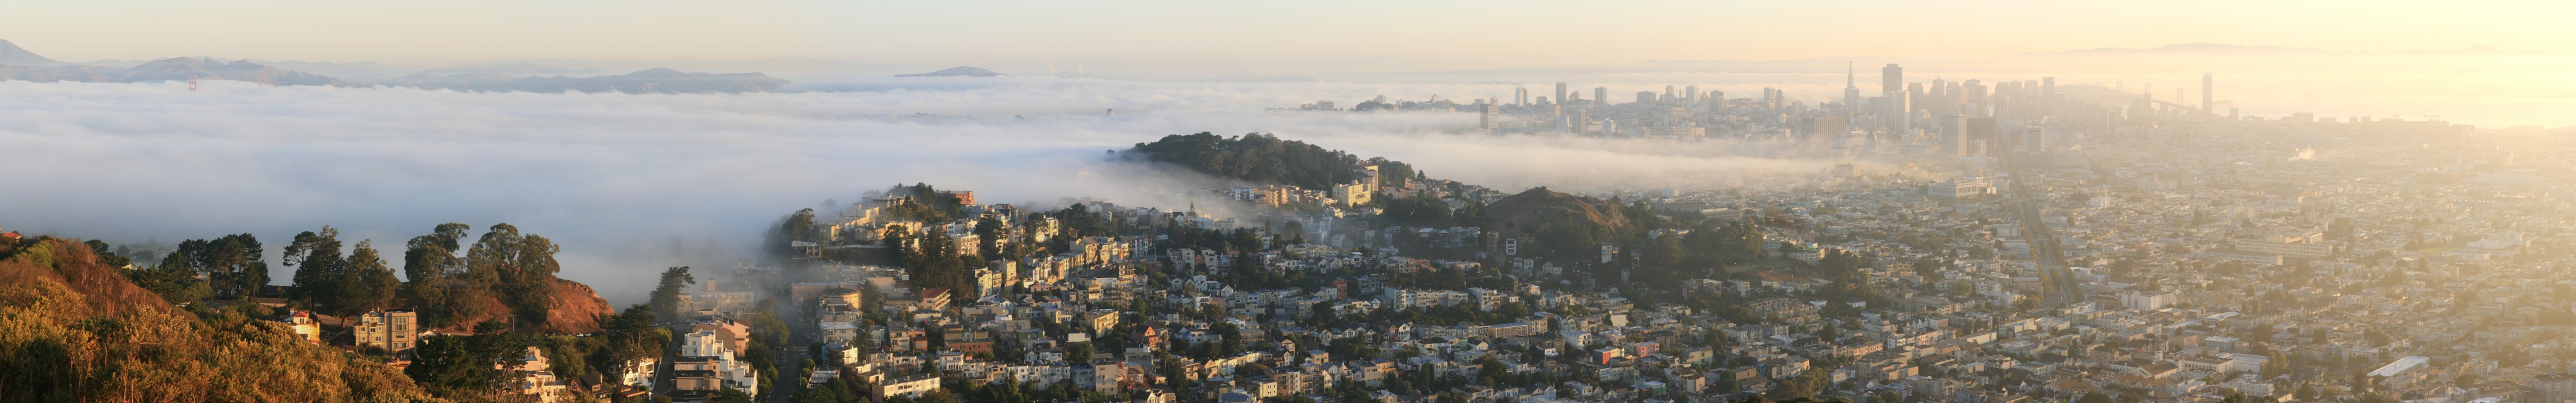 San Francisco Downtown, and Golden Gate Bridge early morning panorama